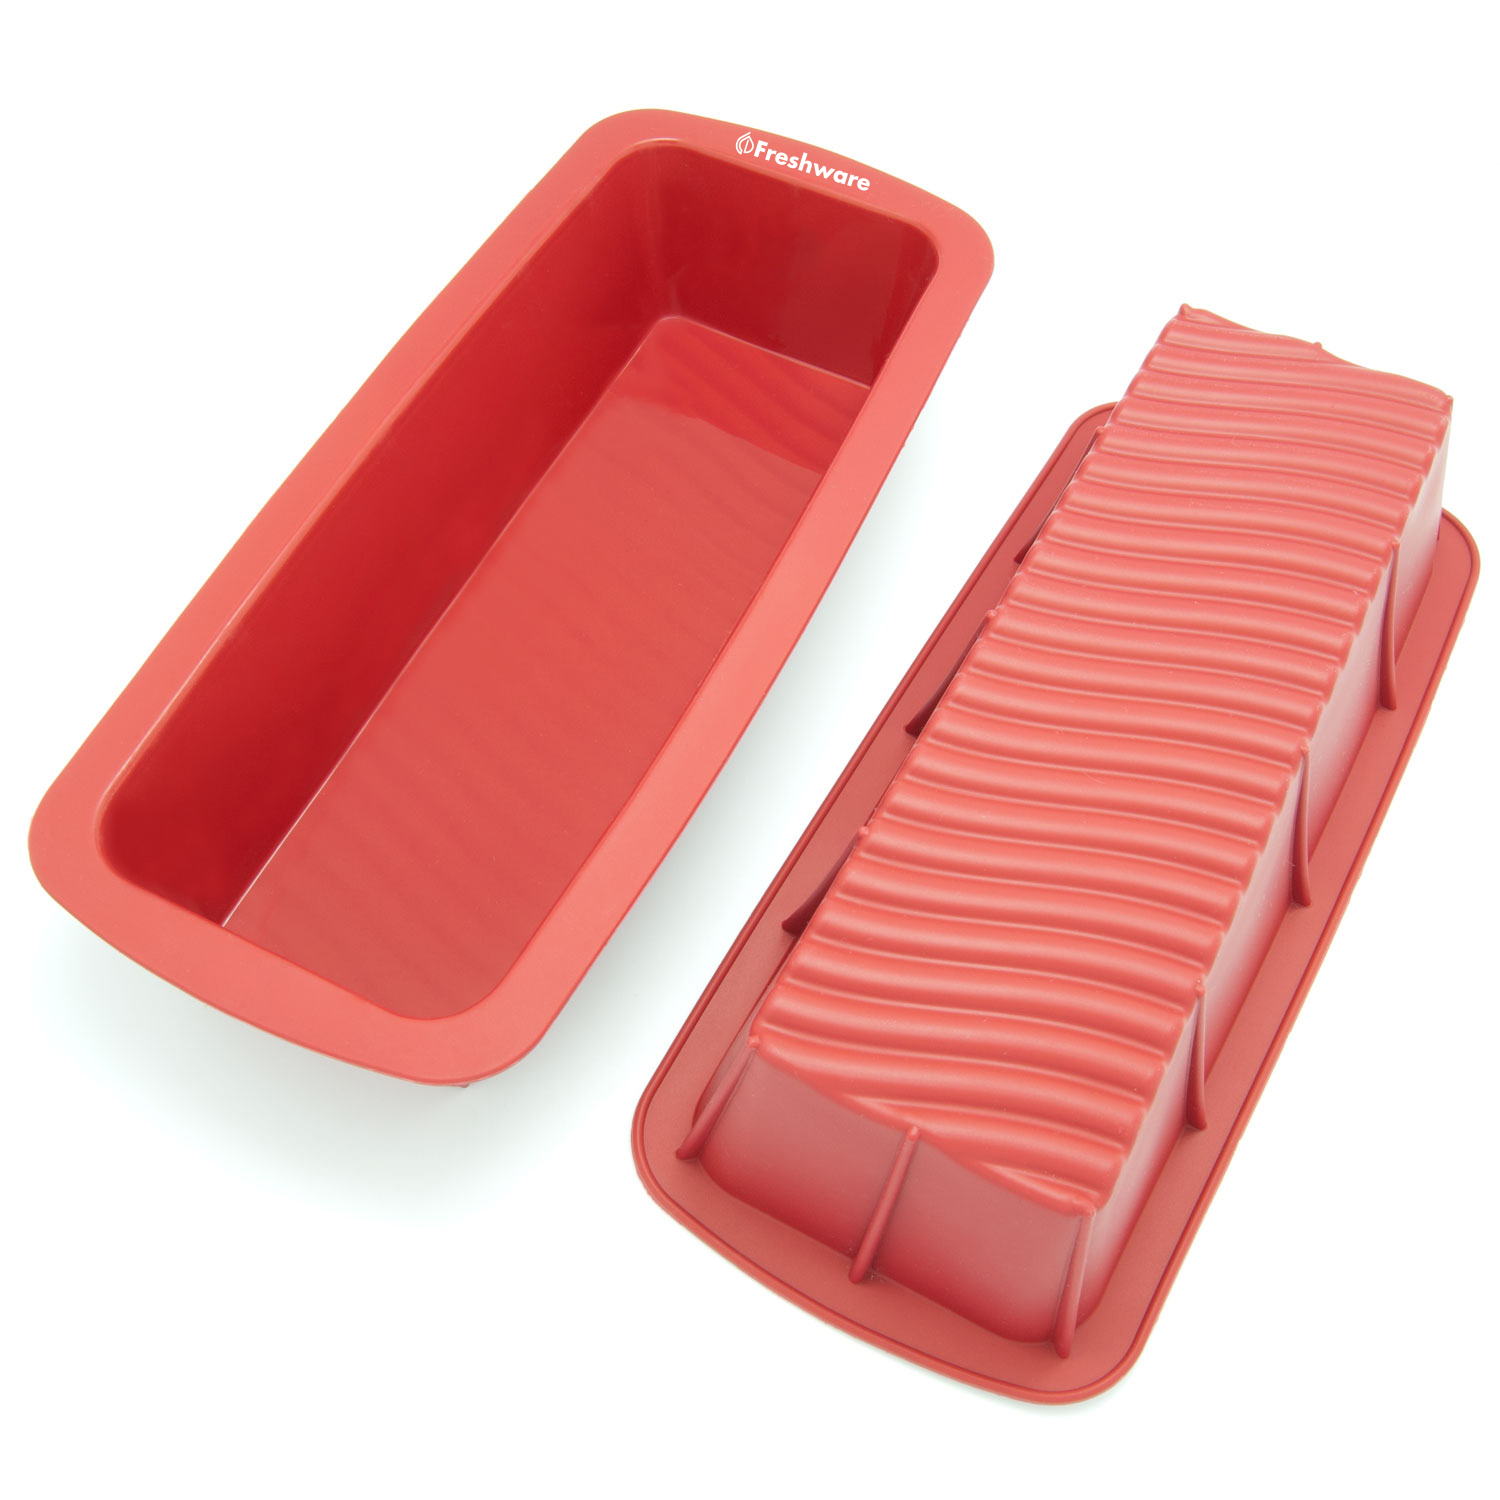 Freshware Silicone Loaf Pan, 11-inch - 1 pcs